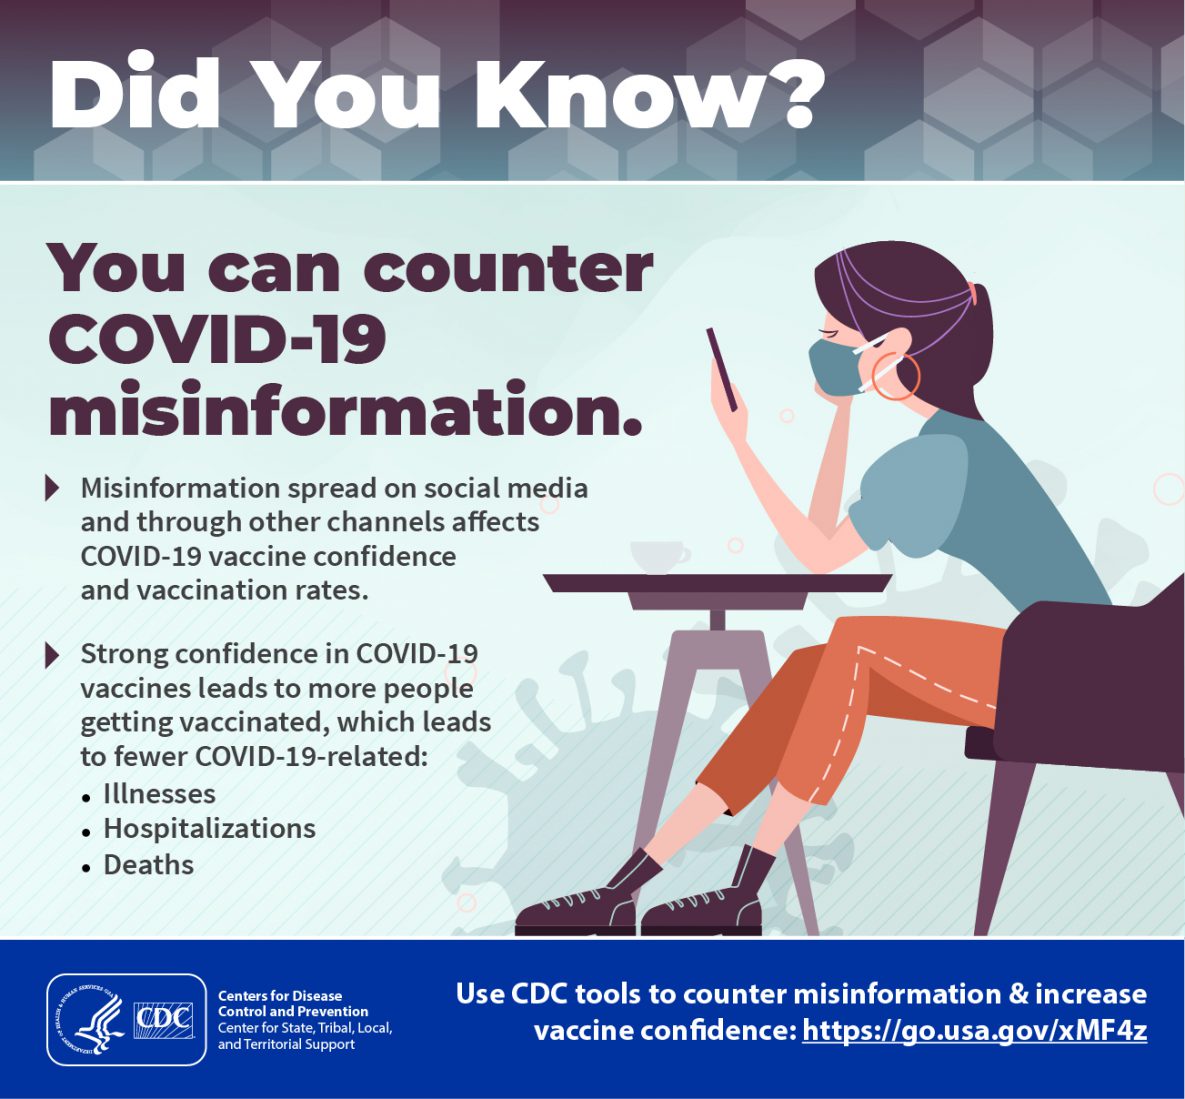 Did You Know? Counter COVID-19 misinformation. Misinformation spread on social media and through other channels affects COVID-19 vaccine confidence and vaccination rates. Strong confidence in COVID-19 vaccines leads to more people getting vaccinated, which leads to fewer COVID-19-related illnesses, hospitalizations, and deaths. Use CDC tools to counter misinformation and increase vaccine confidence: https://go.usa.gov/xMF4z